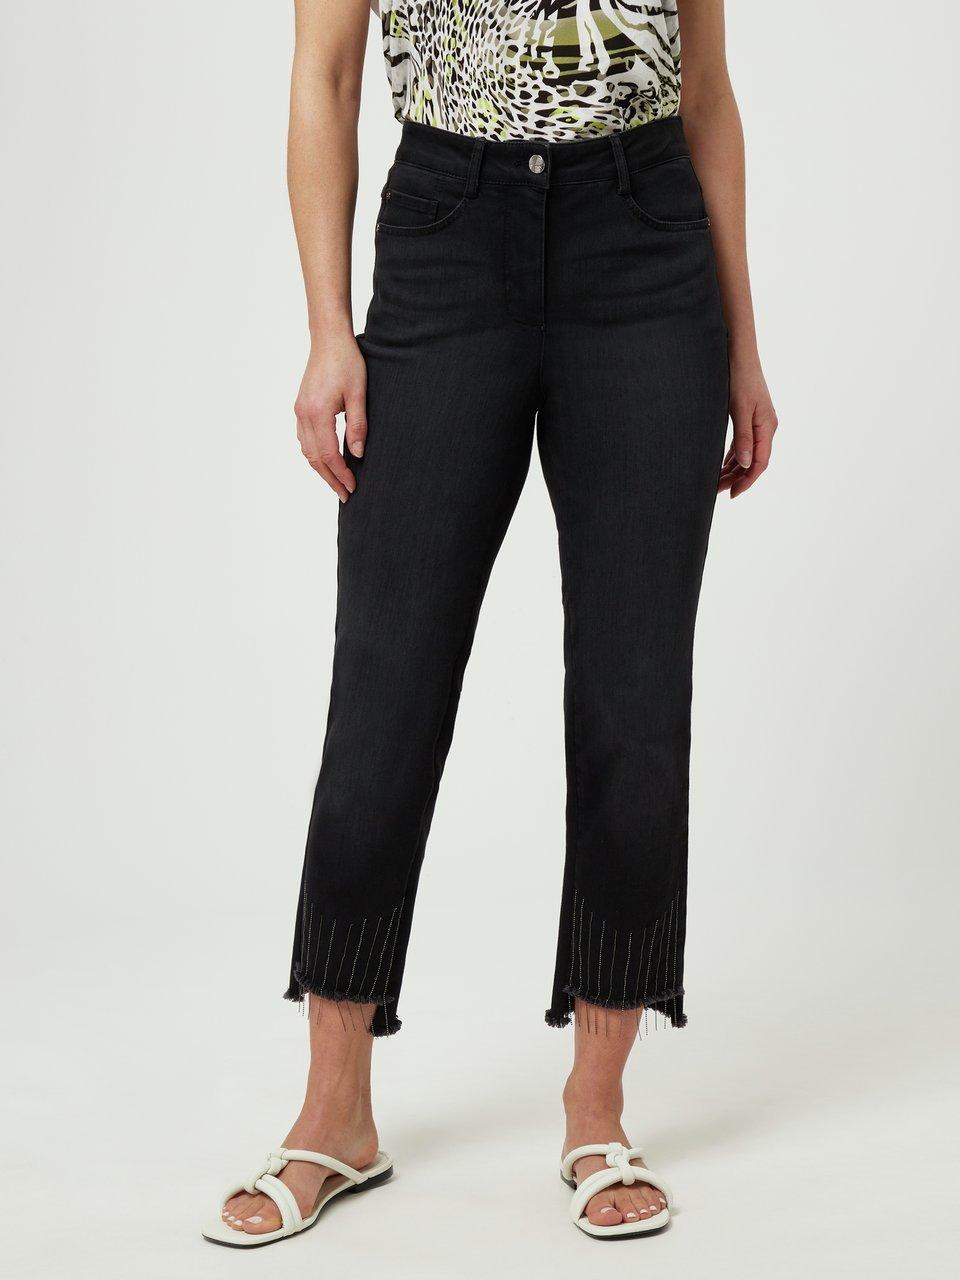 BASLER - Cropped-Jeans Modell Norma